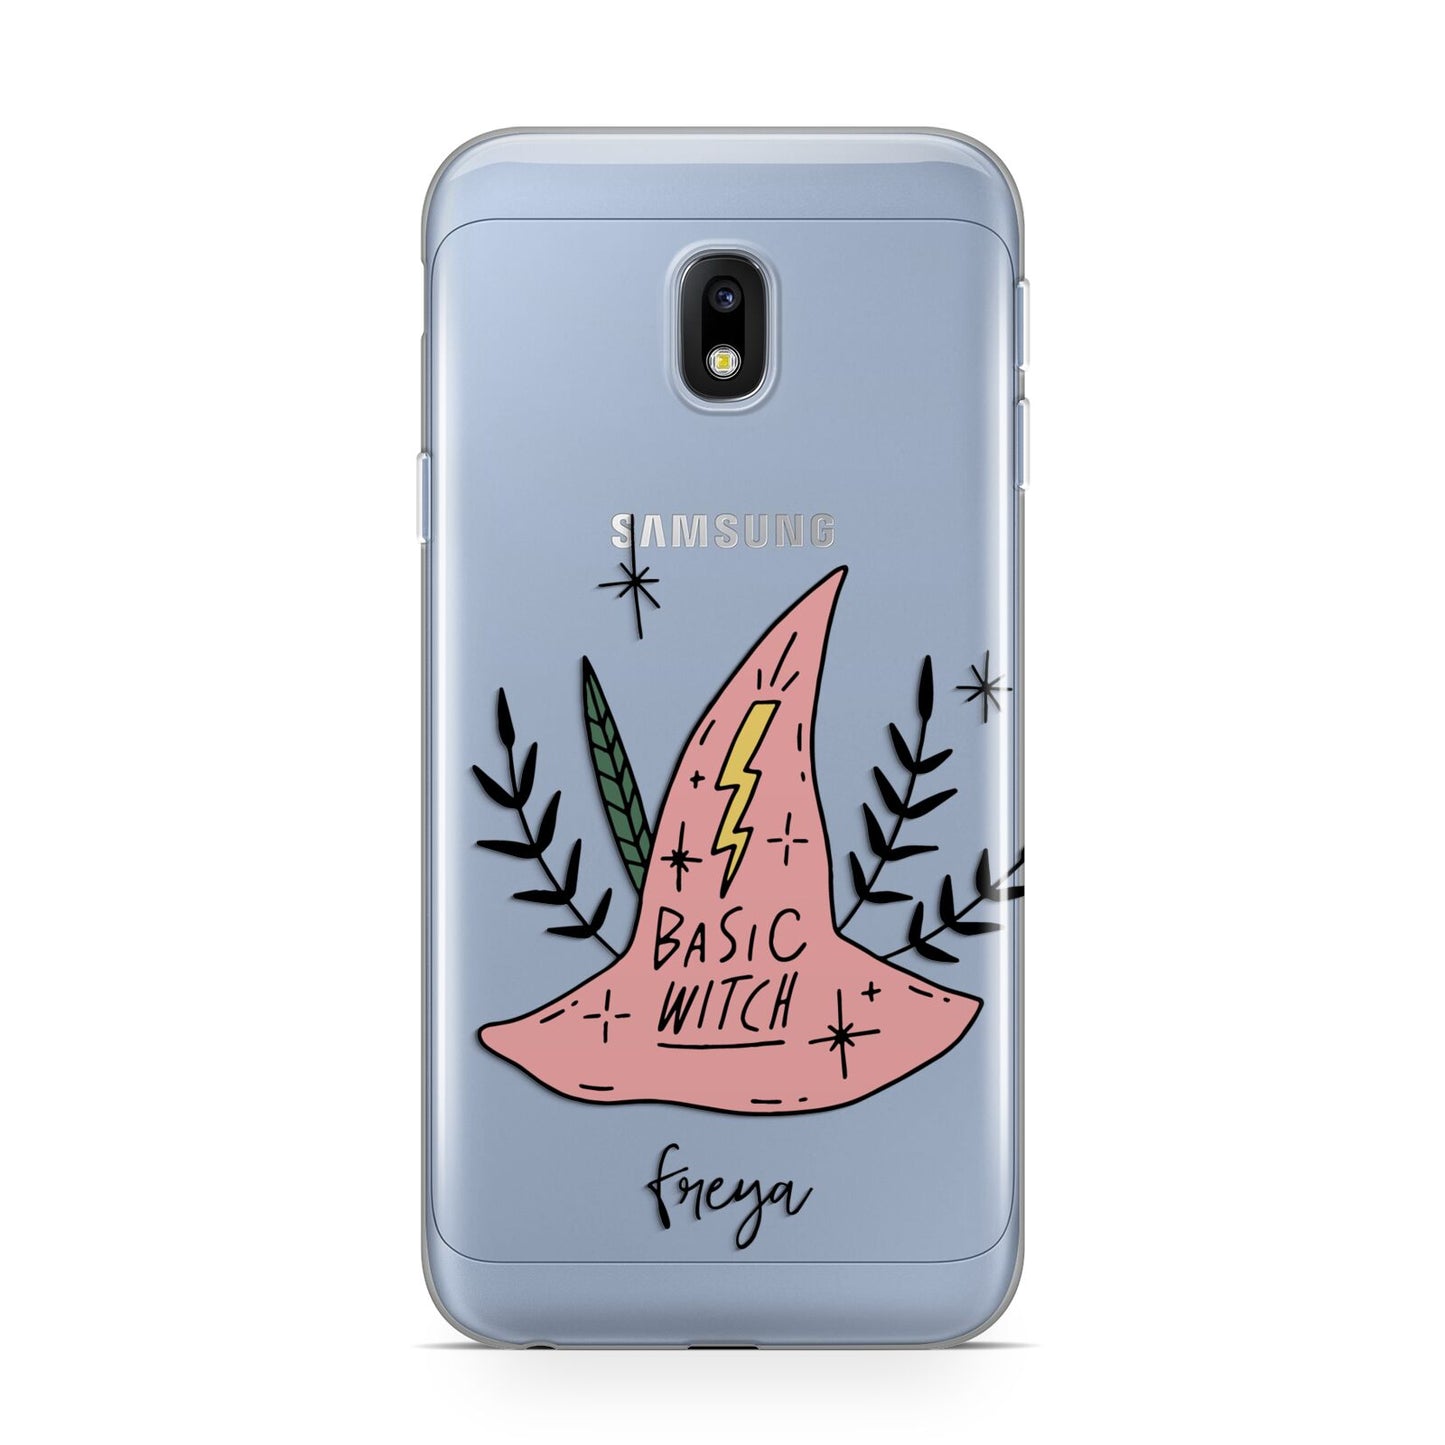 Basic Witch Hat Personalised Samsung Galaxy J3 2017 Case